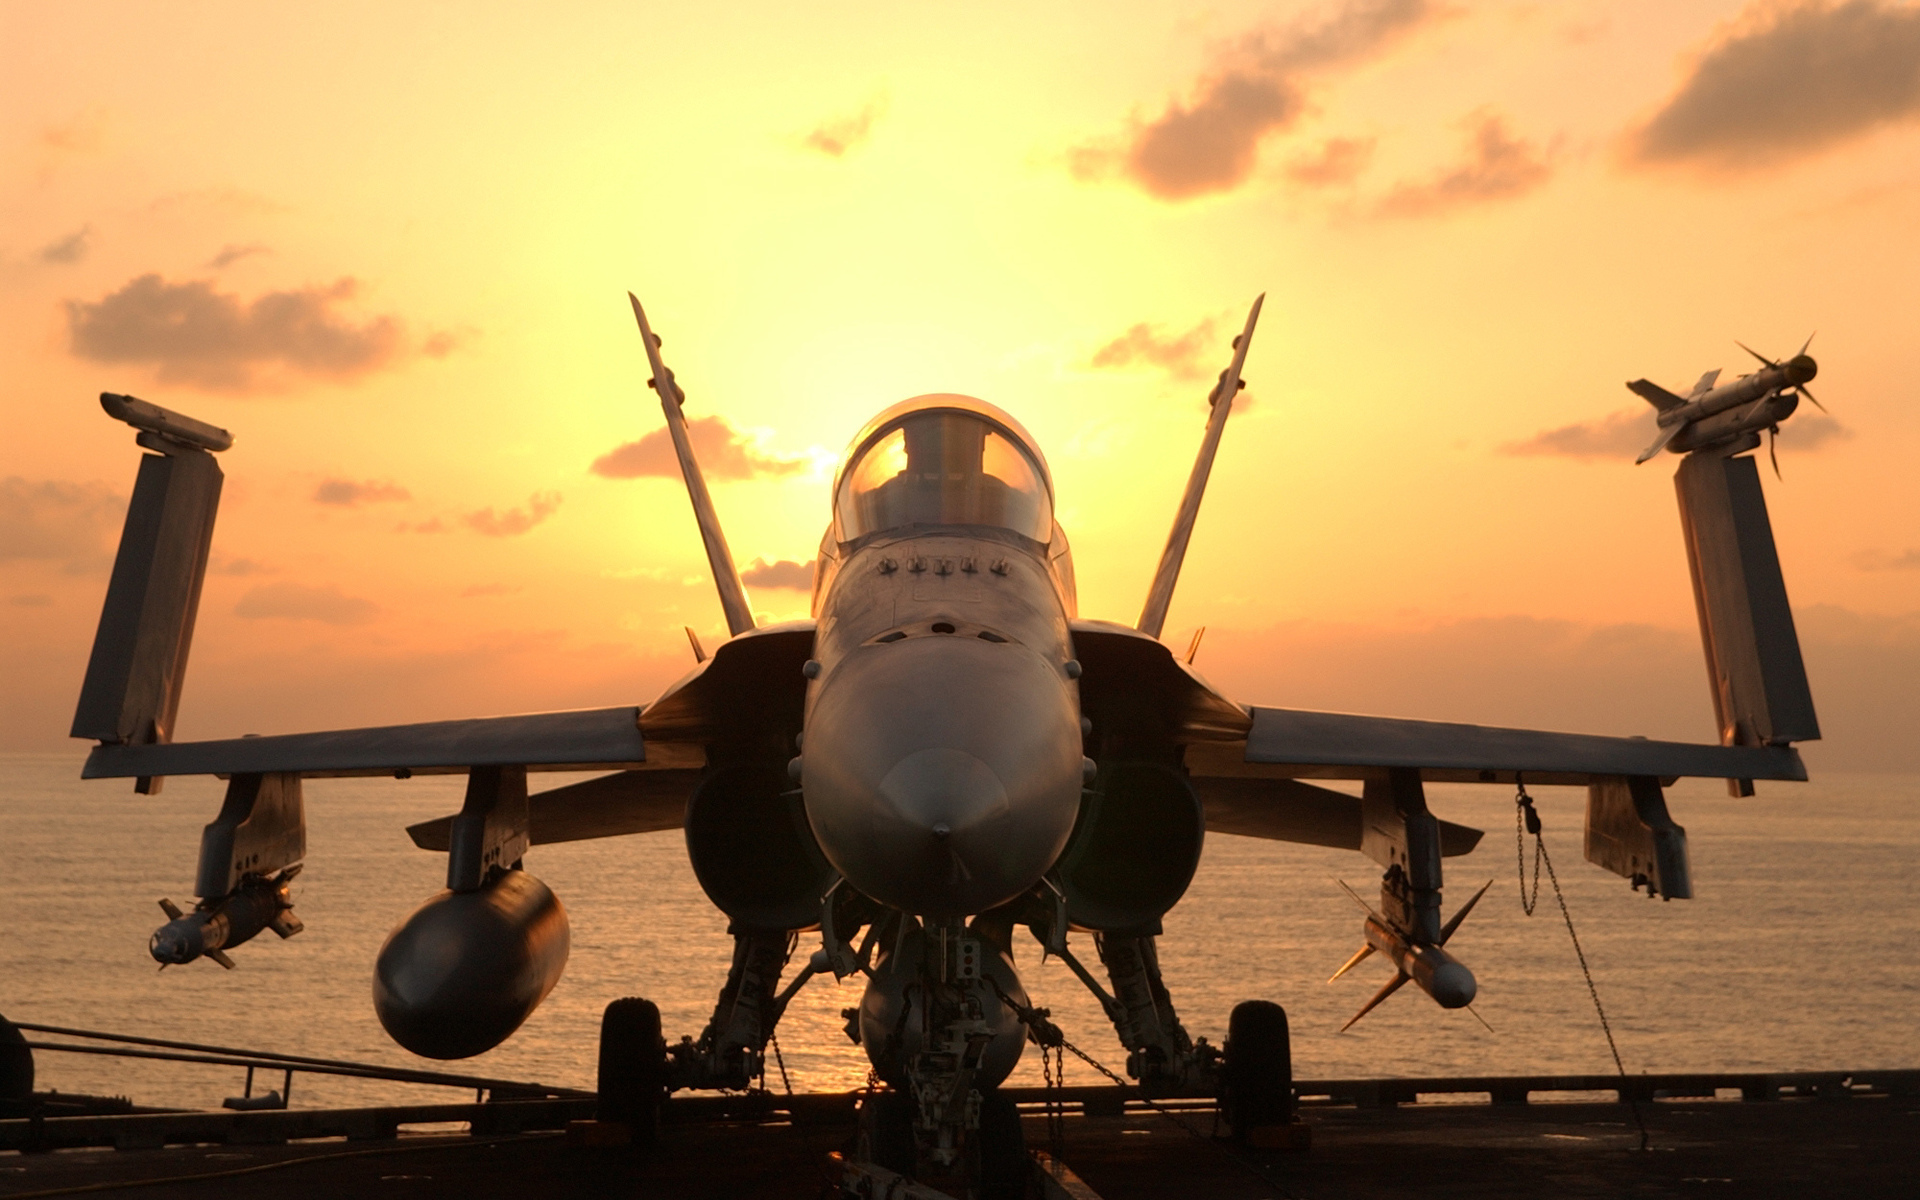 vehicles, Aircraft, Airplanes, Plane, Wings, Ships, Boats, Carrier, Ocean, Sea, Seascape, Weapons, Cannon, Bombs, Missile, Sunrise, Sunset, Sky, Clouds Wallpaper